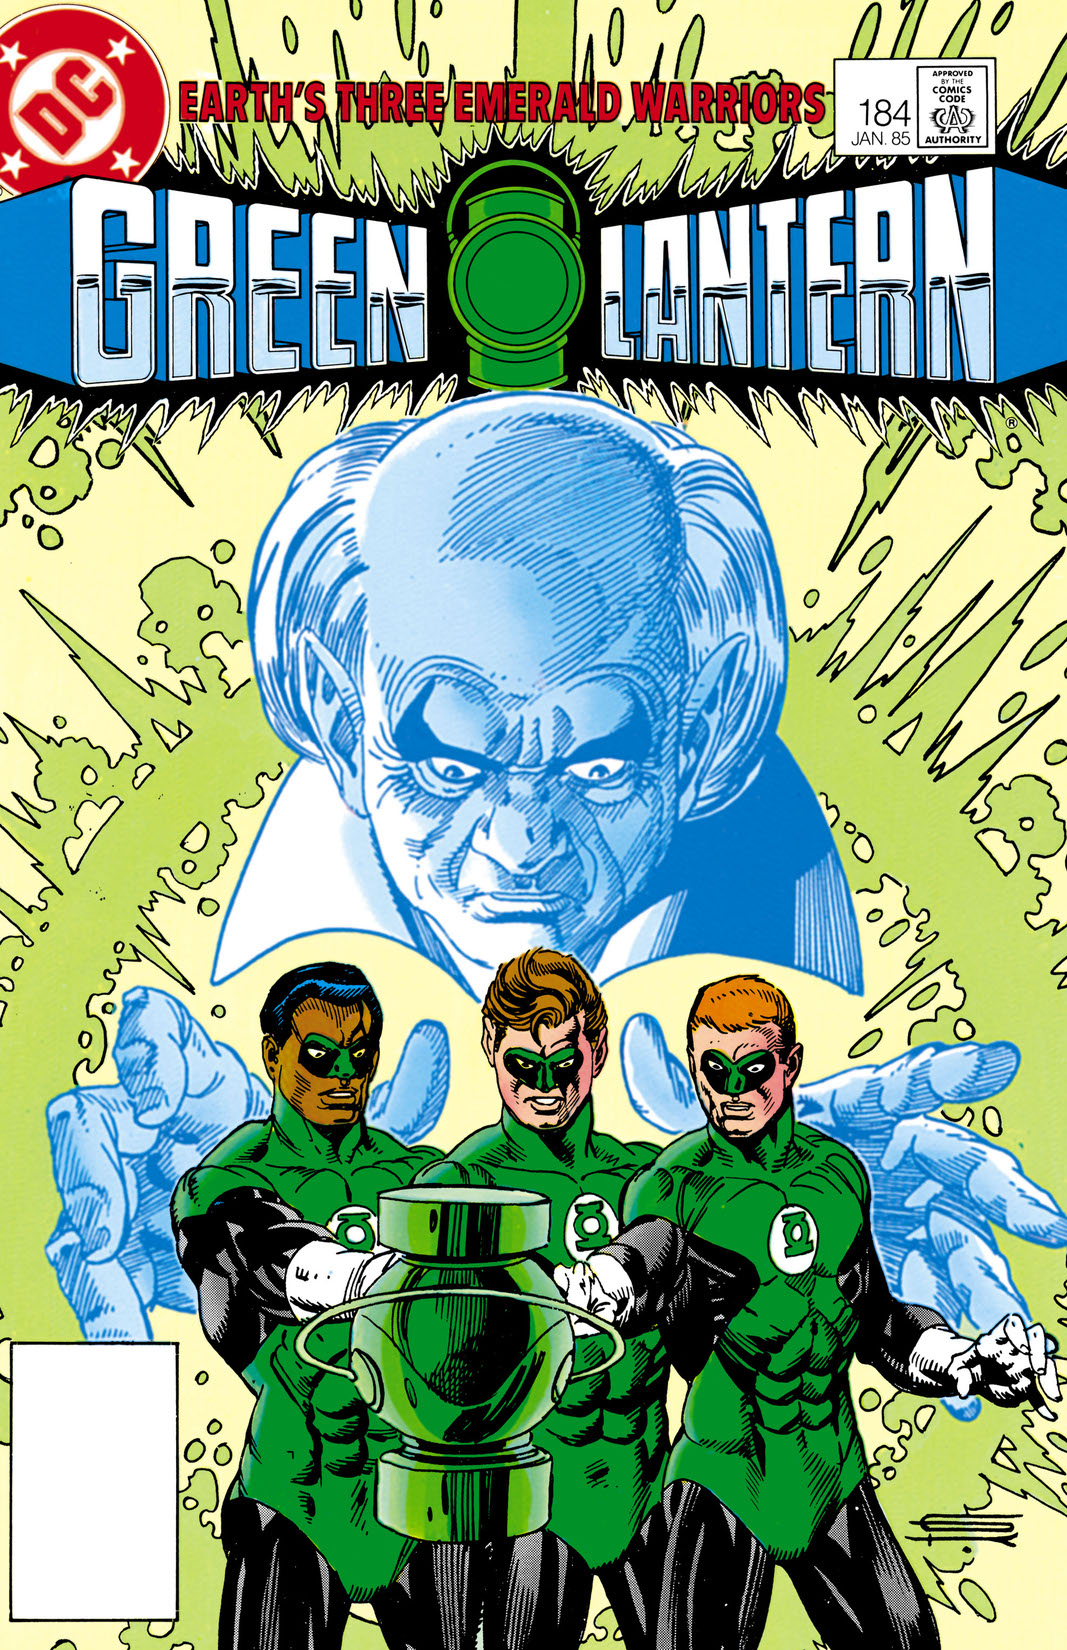 Green Lantern (1960-) #184 preview images